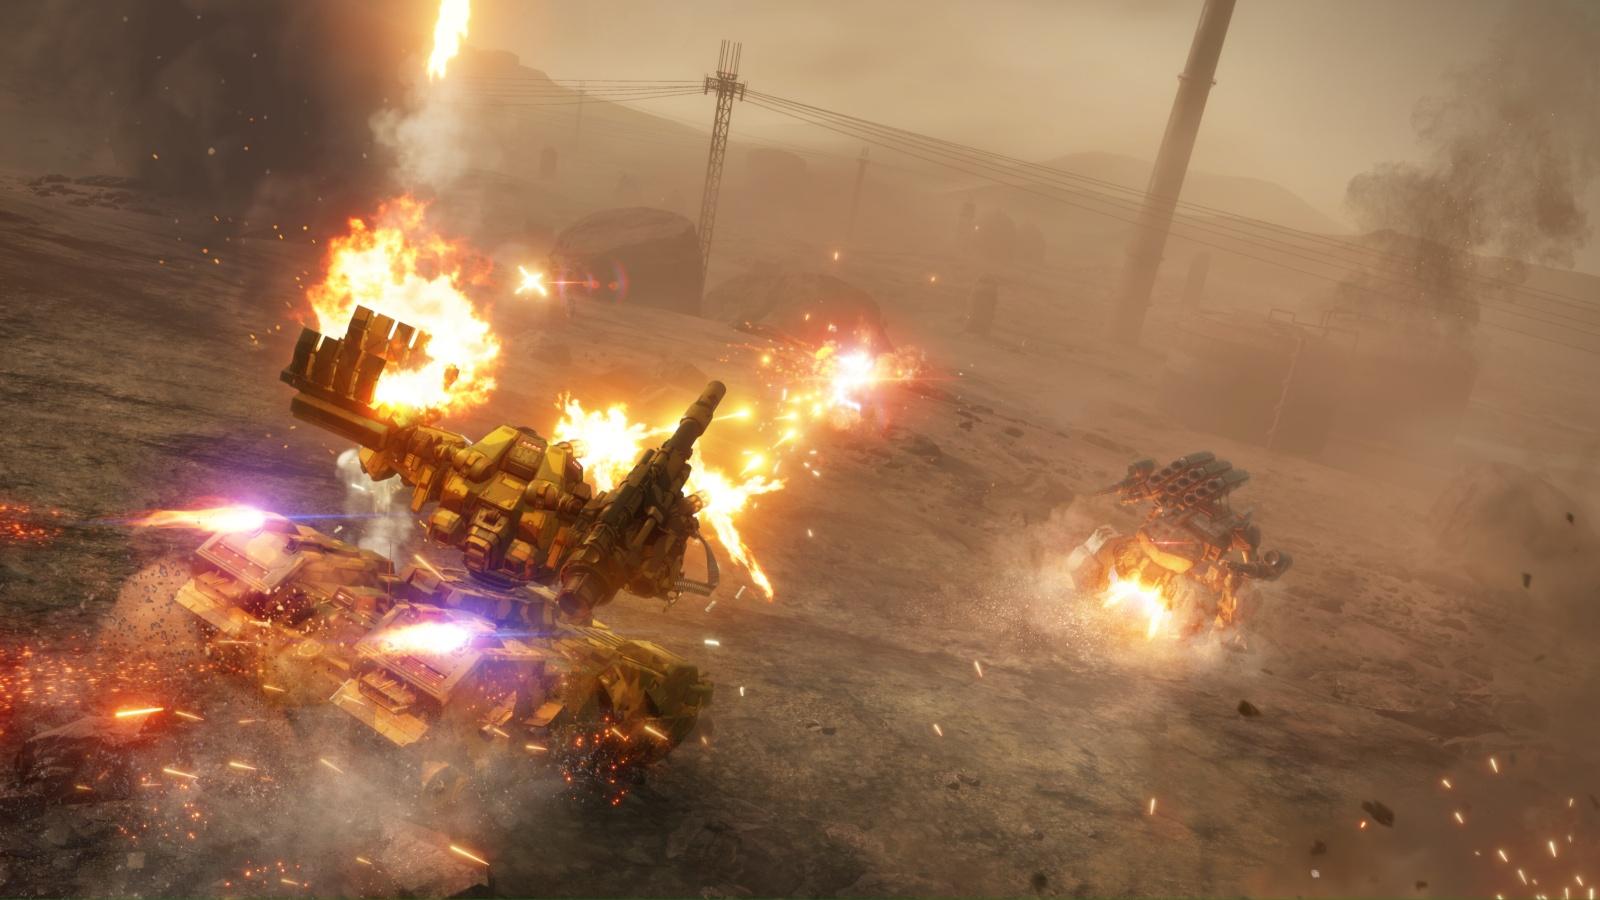 A screenshot of Armored Core 6 from Steam